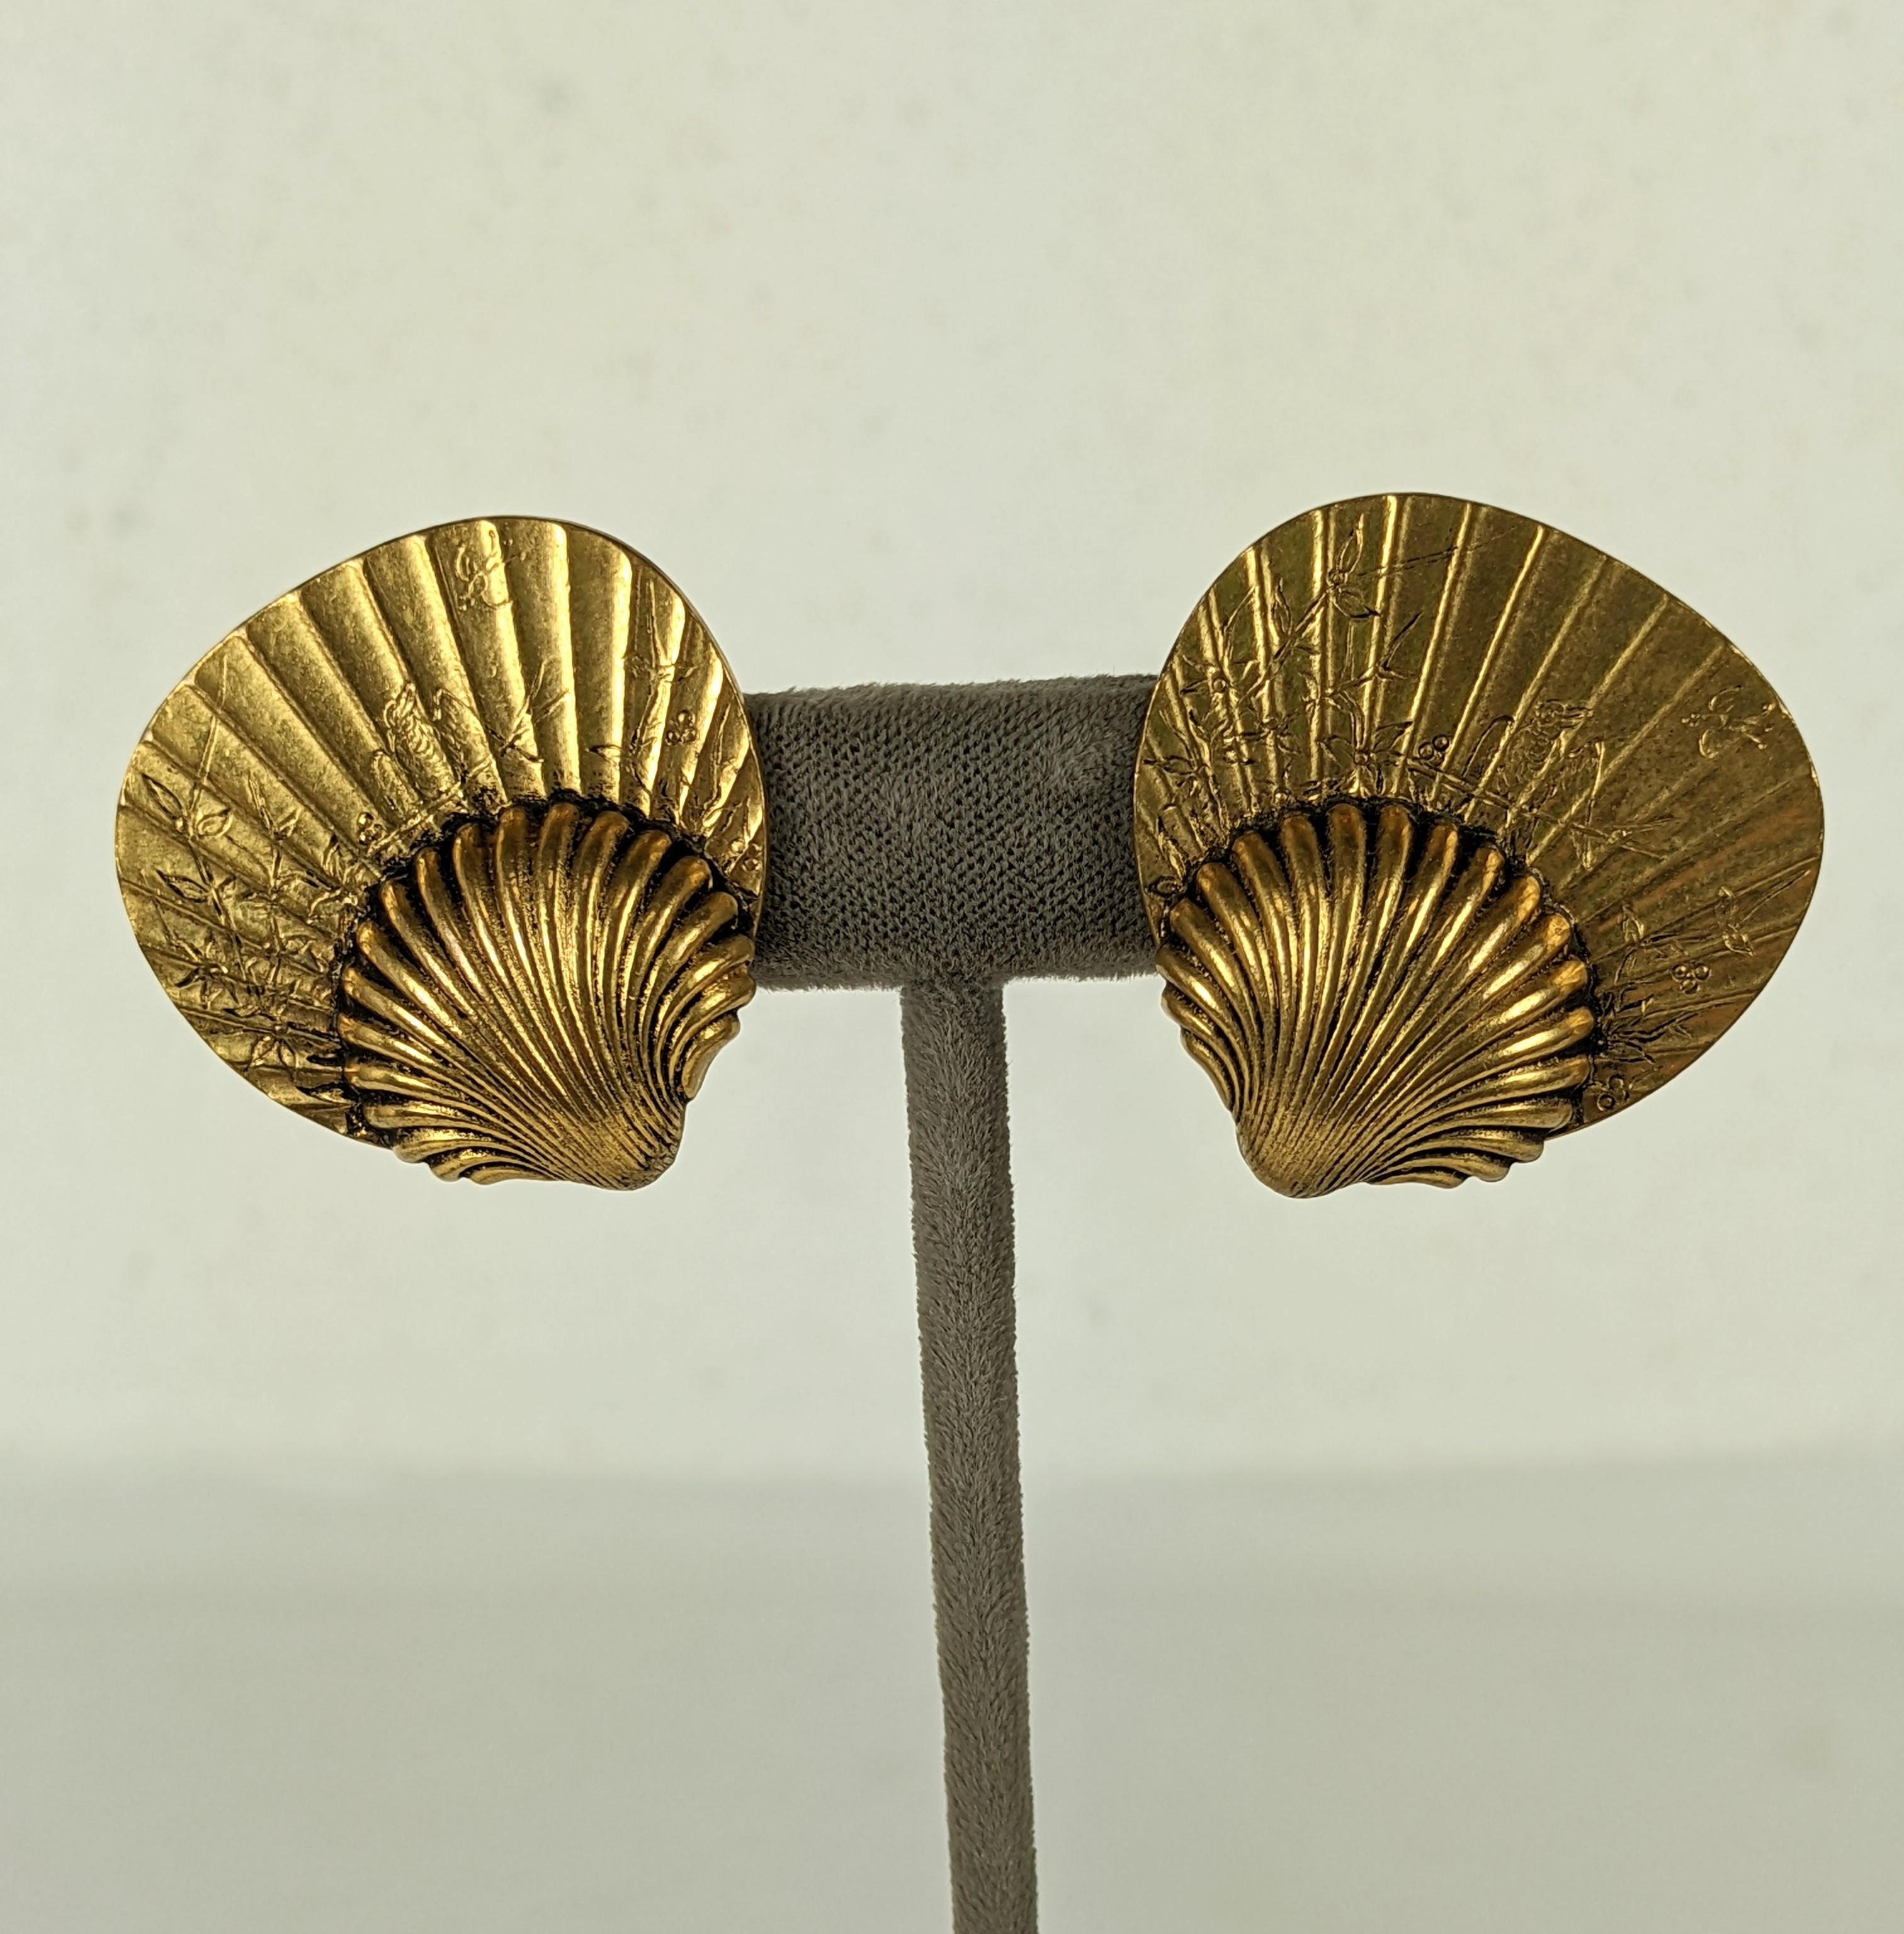 Lovely Chanel Japonesque Fan Earrings circa 1960's France. A marriage of European and Eastern aesthetics with a bird engraved Japanese fan motif mounted with a classical French clam shell motif in Antique gold finish by Maison Denez. Clip back